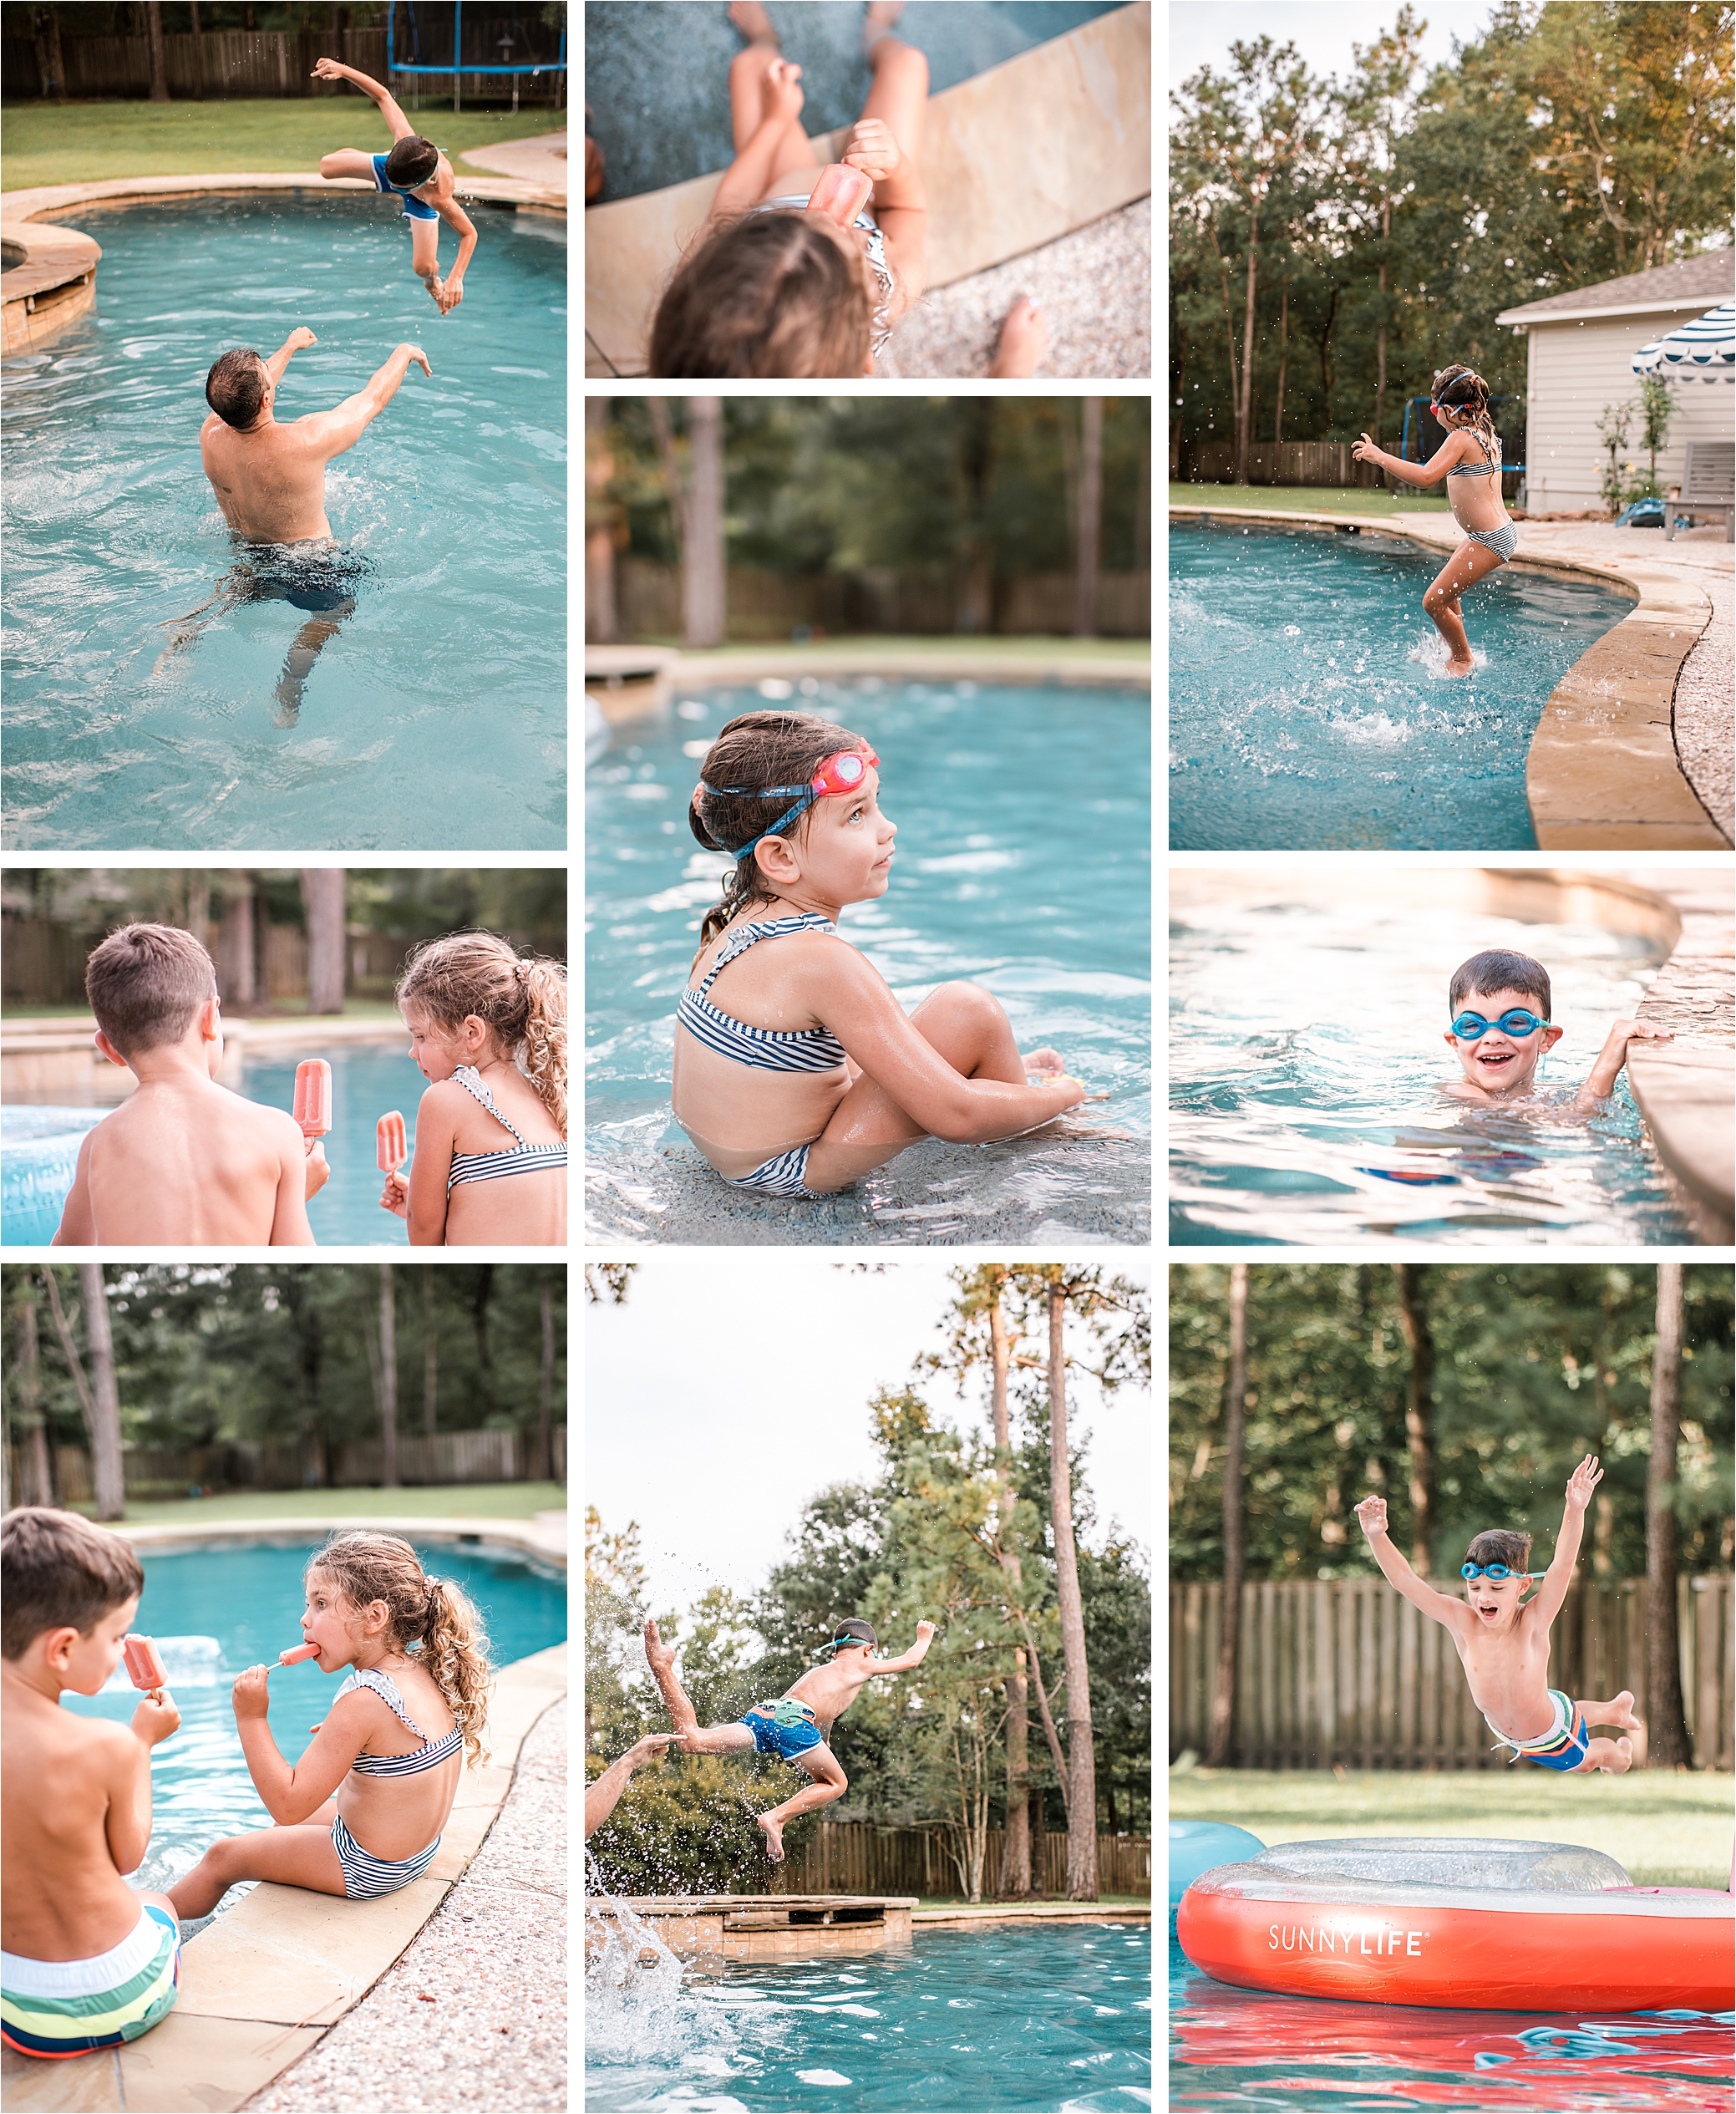 kids in summer in the pool. eating popsicles, swimming, jumping. The Woodlands Texas.